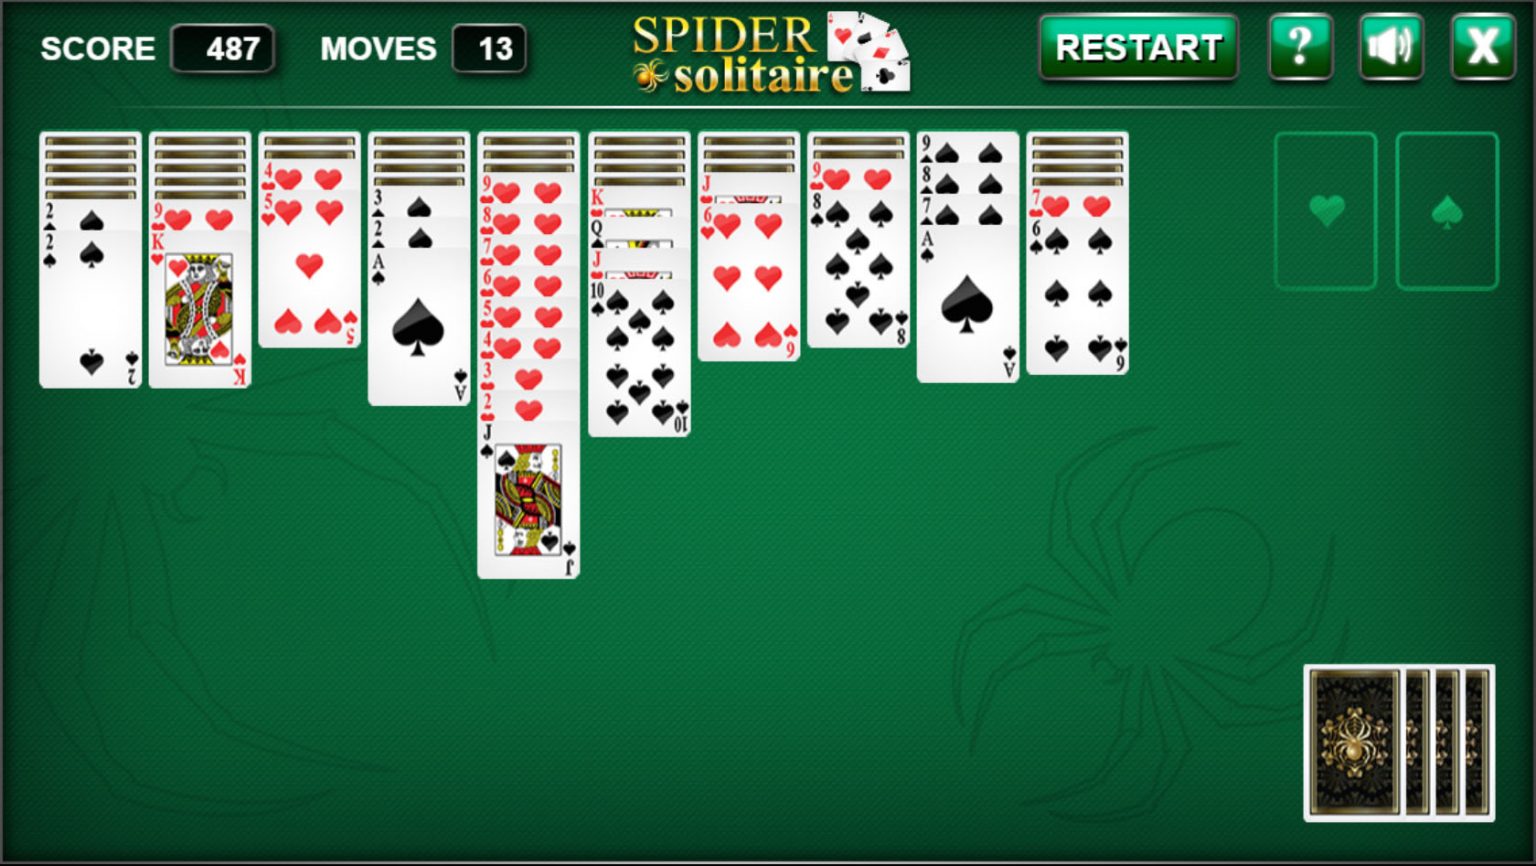 play spider solitaire aarp